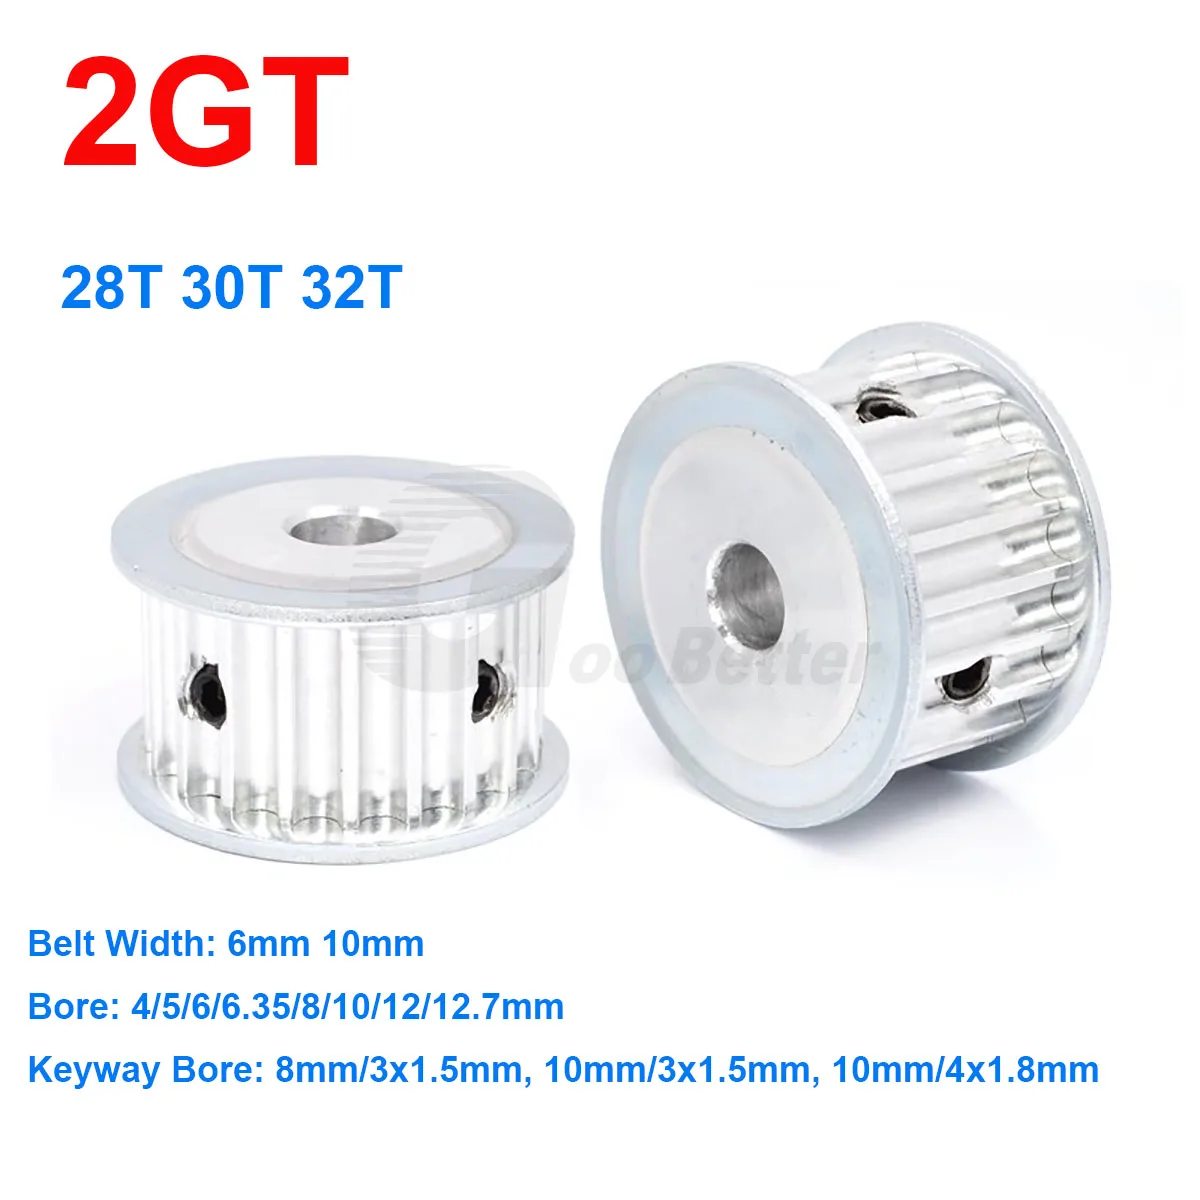 

2GT 28T 30T 32T Timing Pulley Bore 4/5/6/6.35/8/10/12/12.7mm For GT2 Width 6mm 10mm Timing Belt 3D Printer CNC Parts